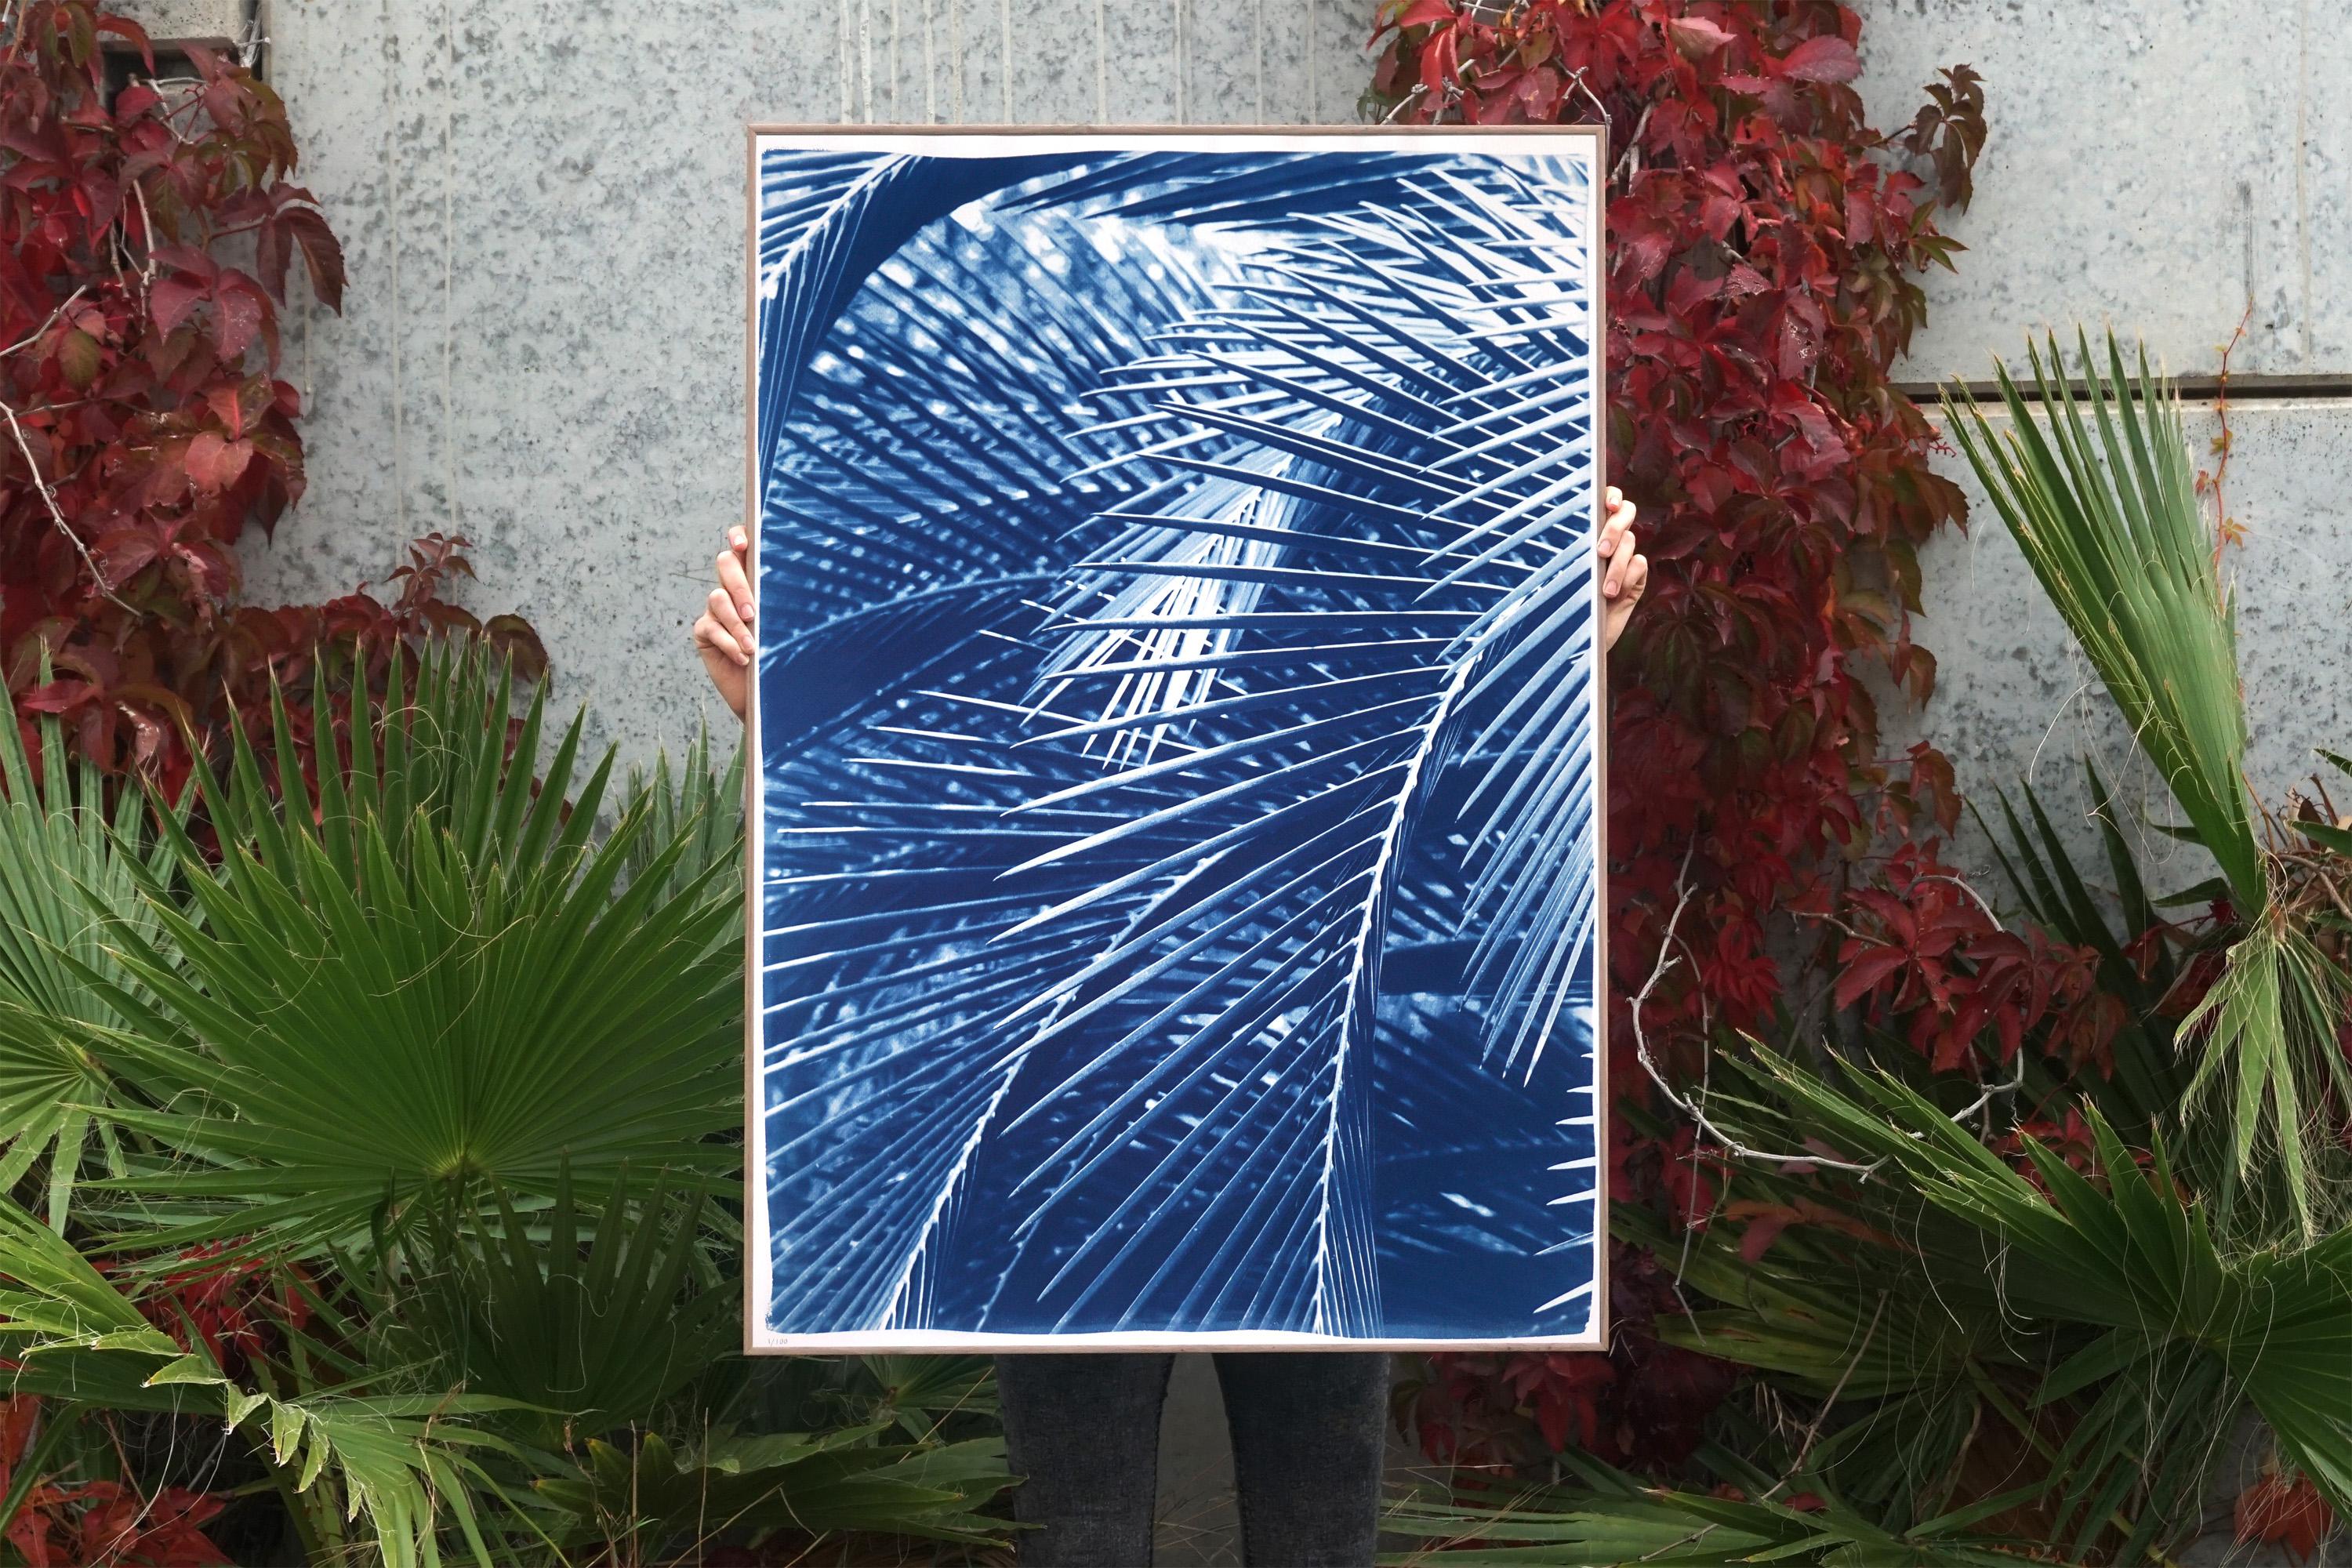 This is an exclusive handprinted limited edition cyanotype of beautiful palm tree leaves. 

Details:
+ Title: Majesty Palm Pattern
+ Year: 2021
+ Edition Size: 100
+ Stamped and Certificate of Authenticity provided
+ Measurements : 70x100 cm (28x 40